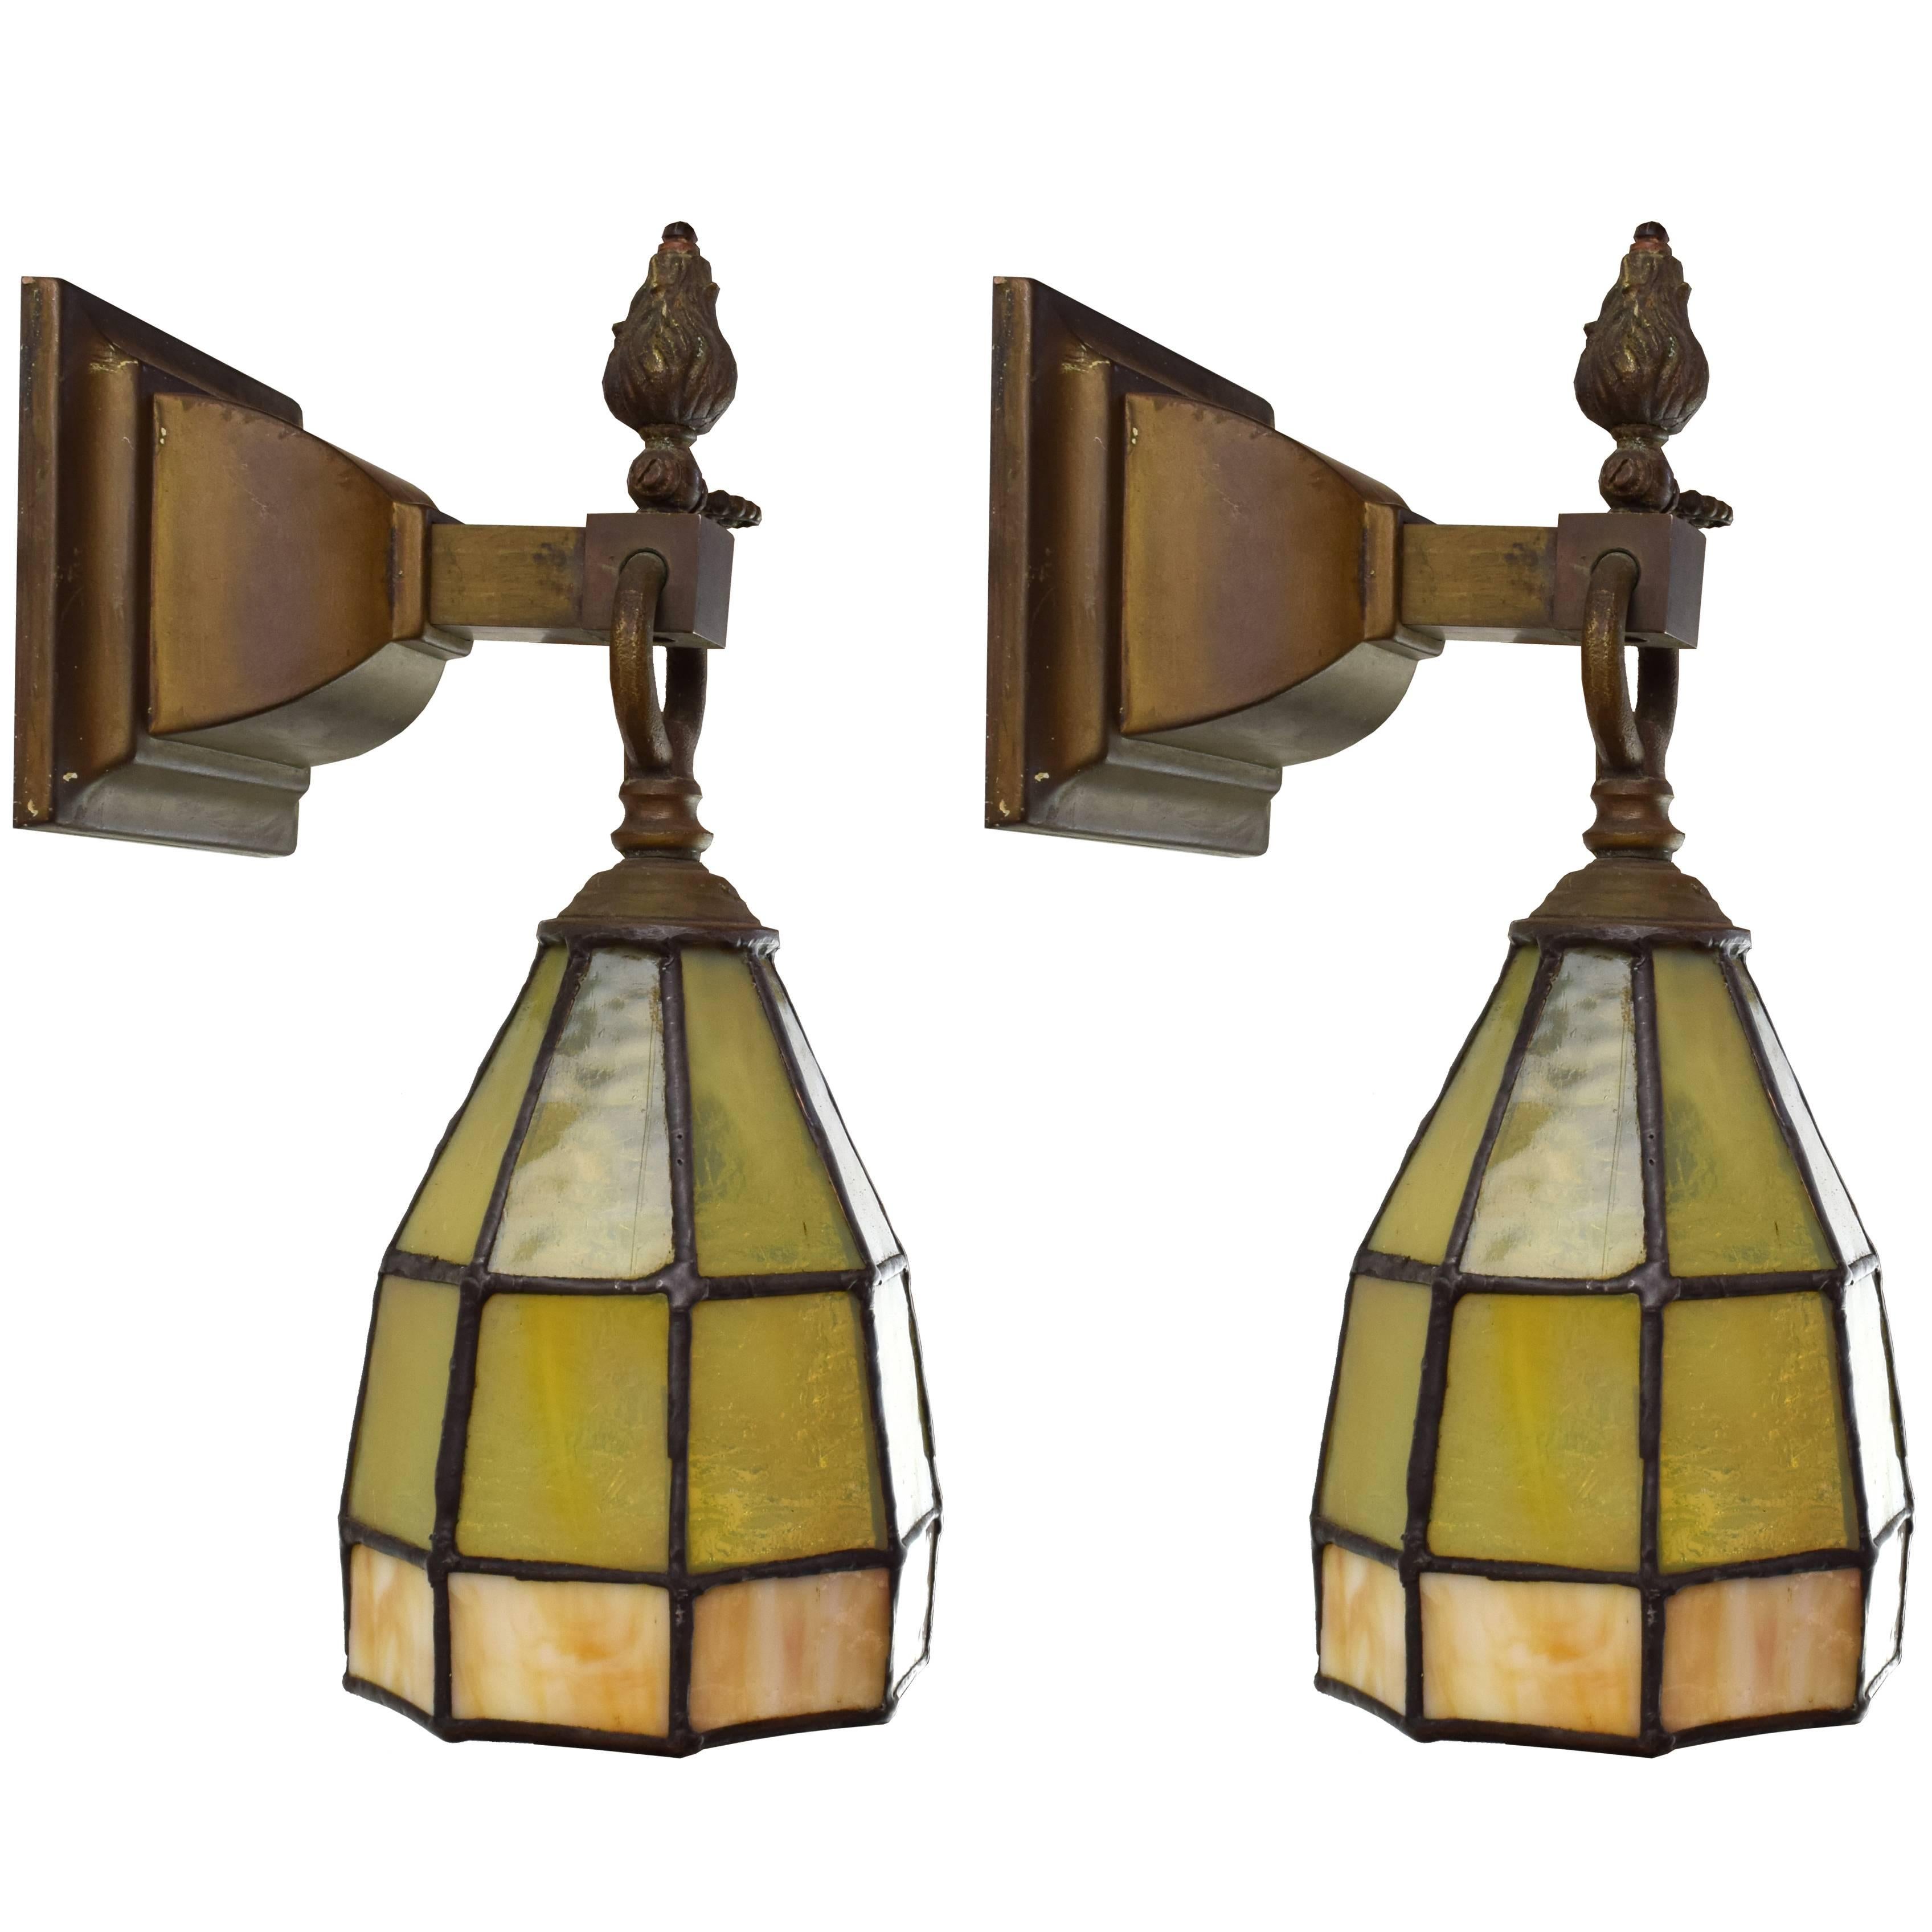 Rare Arts and Crafts Sconce Pair with Stained Glass Shade